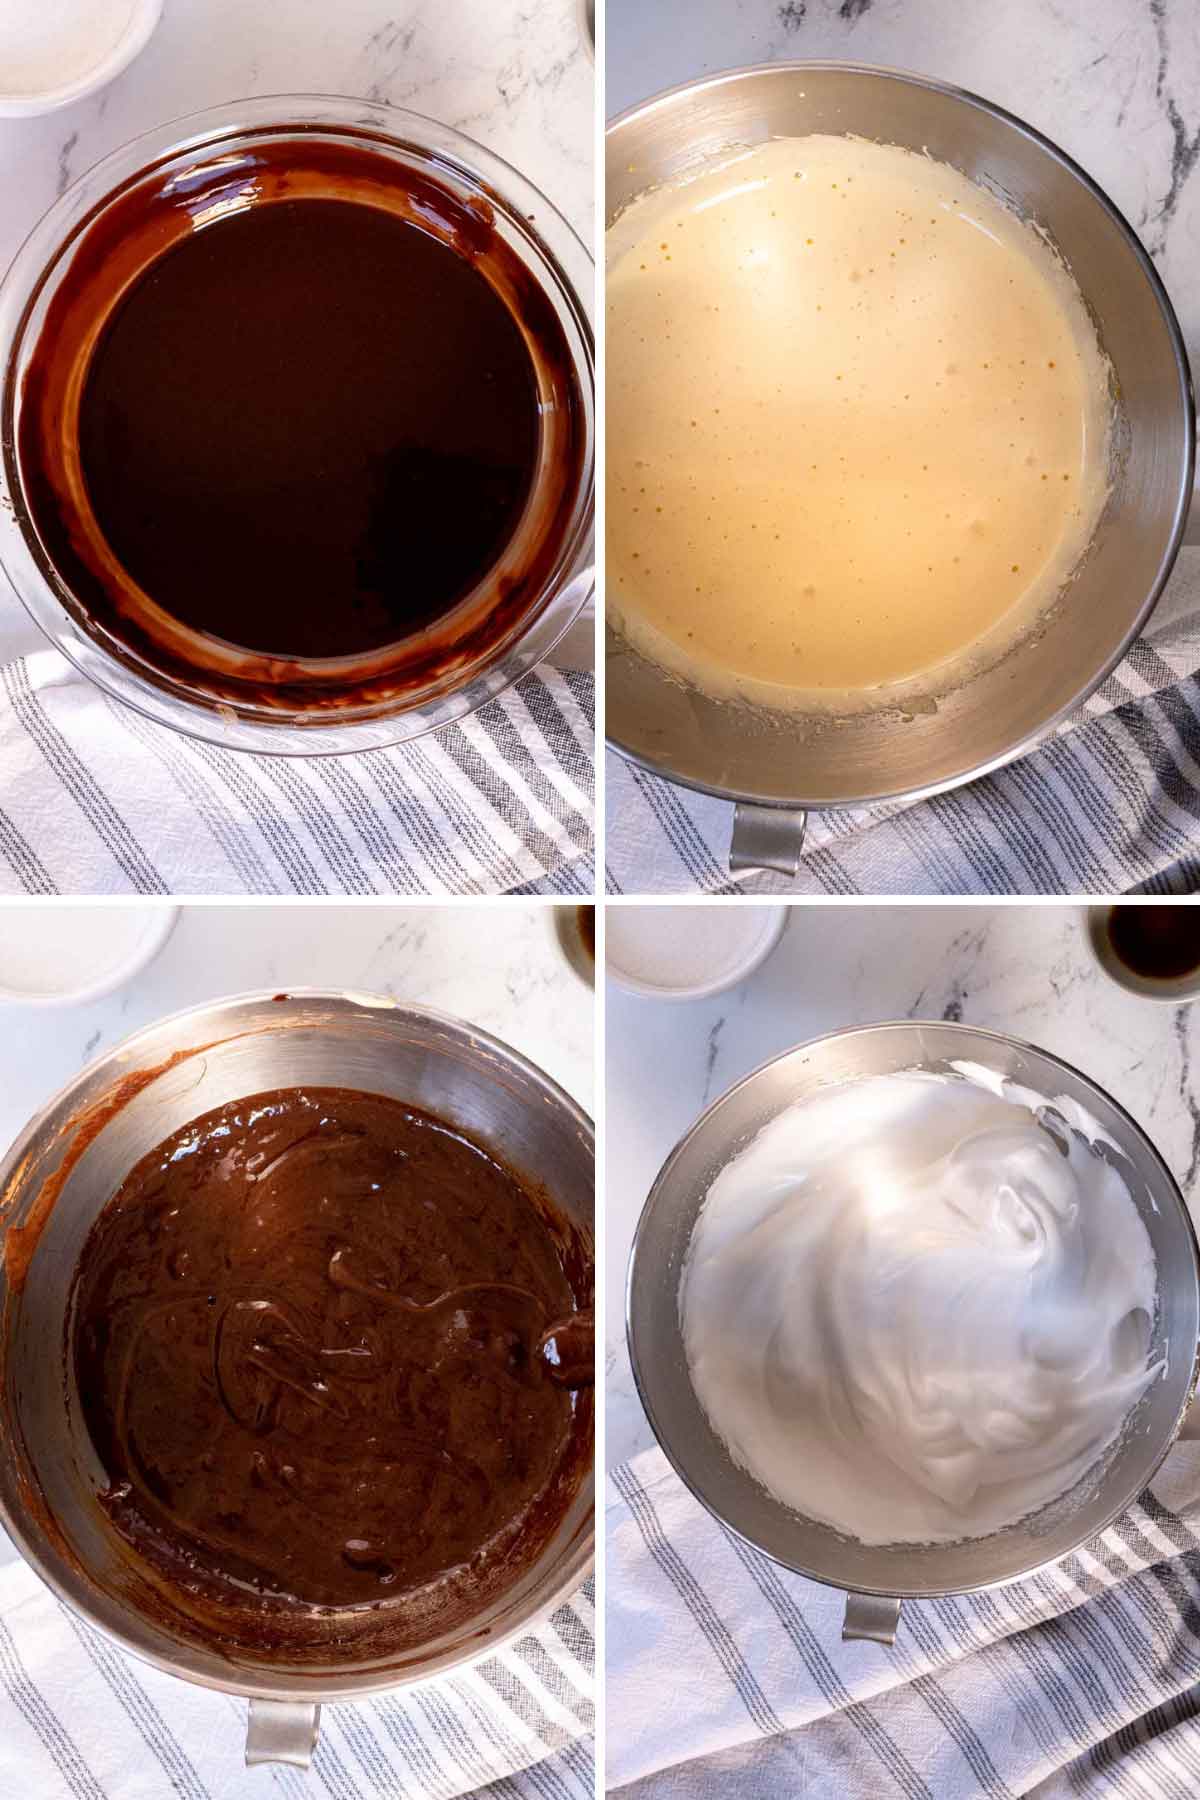 The egg yolk being mixed with the melted chocolate.